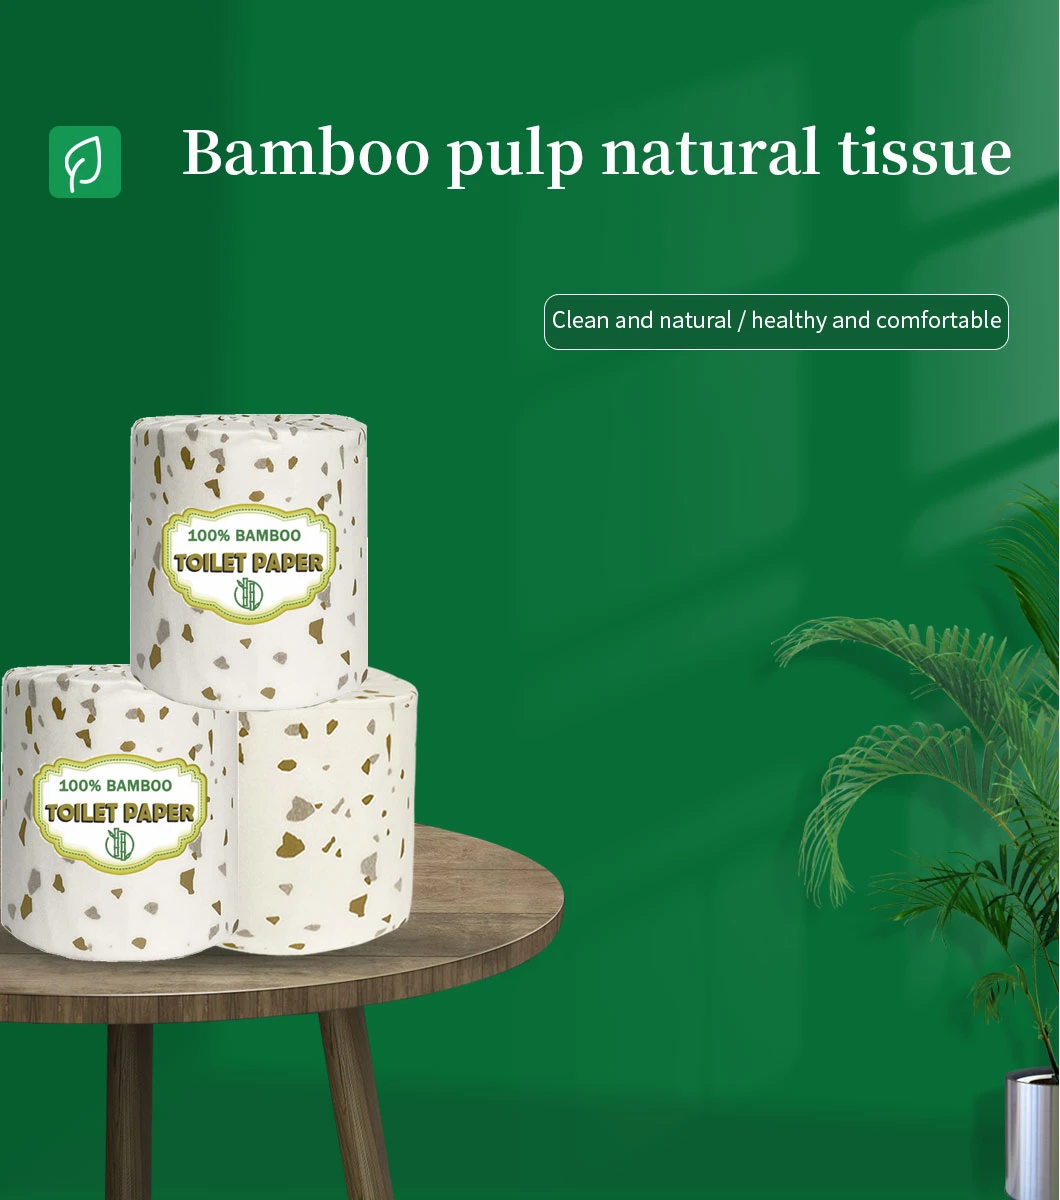 Jumbo Roll Toilet Paper Cleaning Products Anti Bacterial Eco-Friendly Environment Protection Wrapping Printed Paper Package